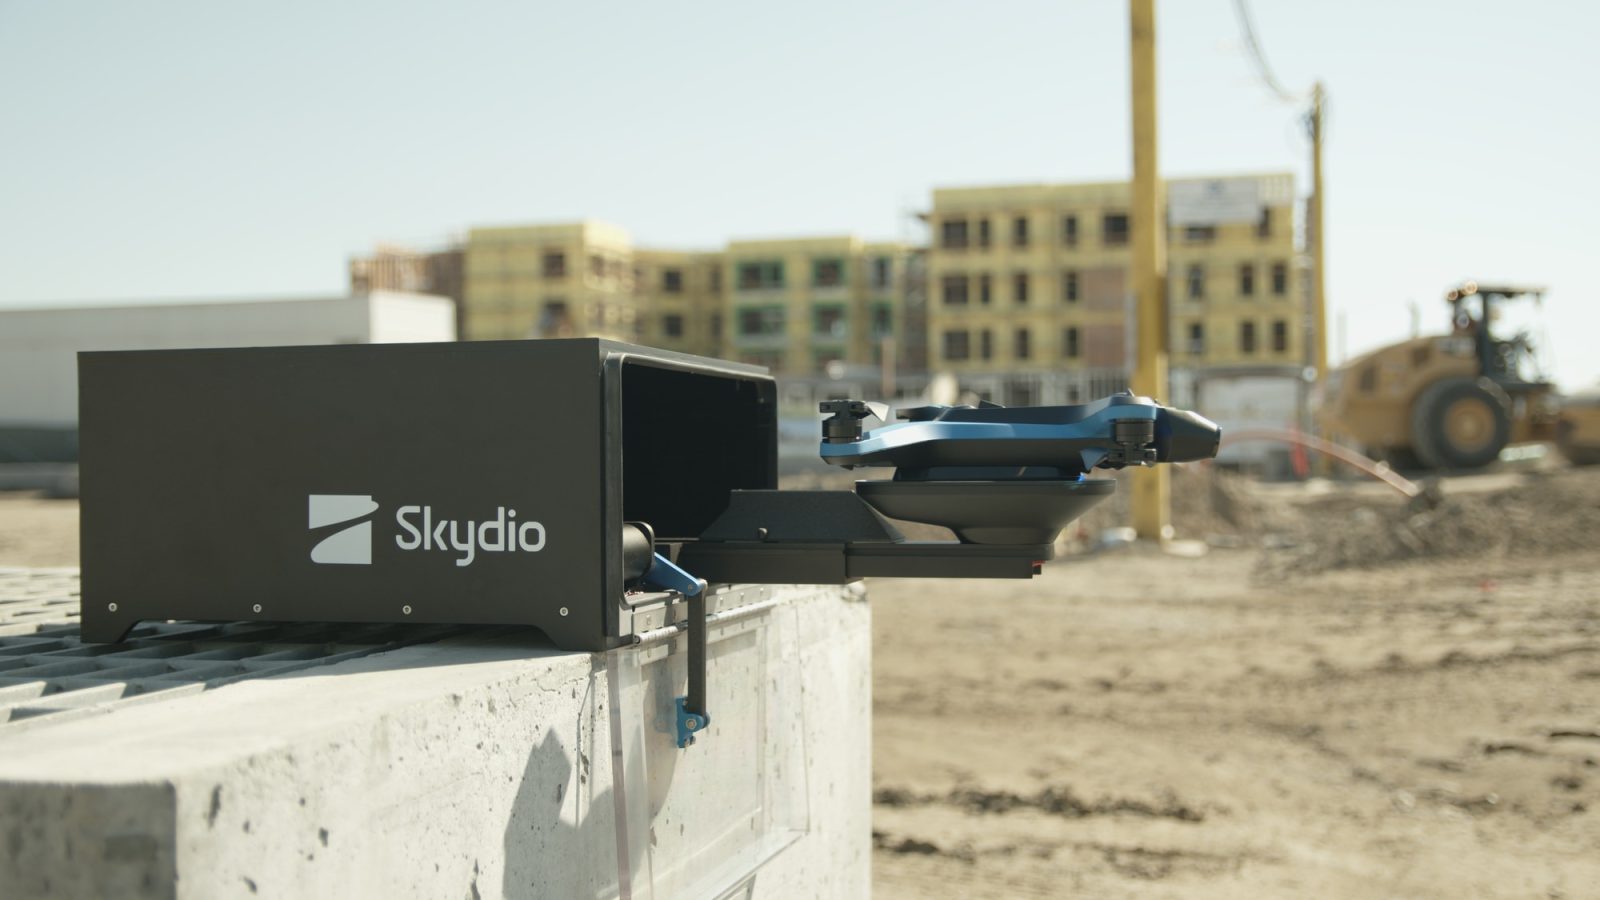 Skydio-enters-the-commercial-drone-market-with-the-Skydio-2-Dock-0002.jpg